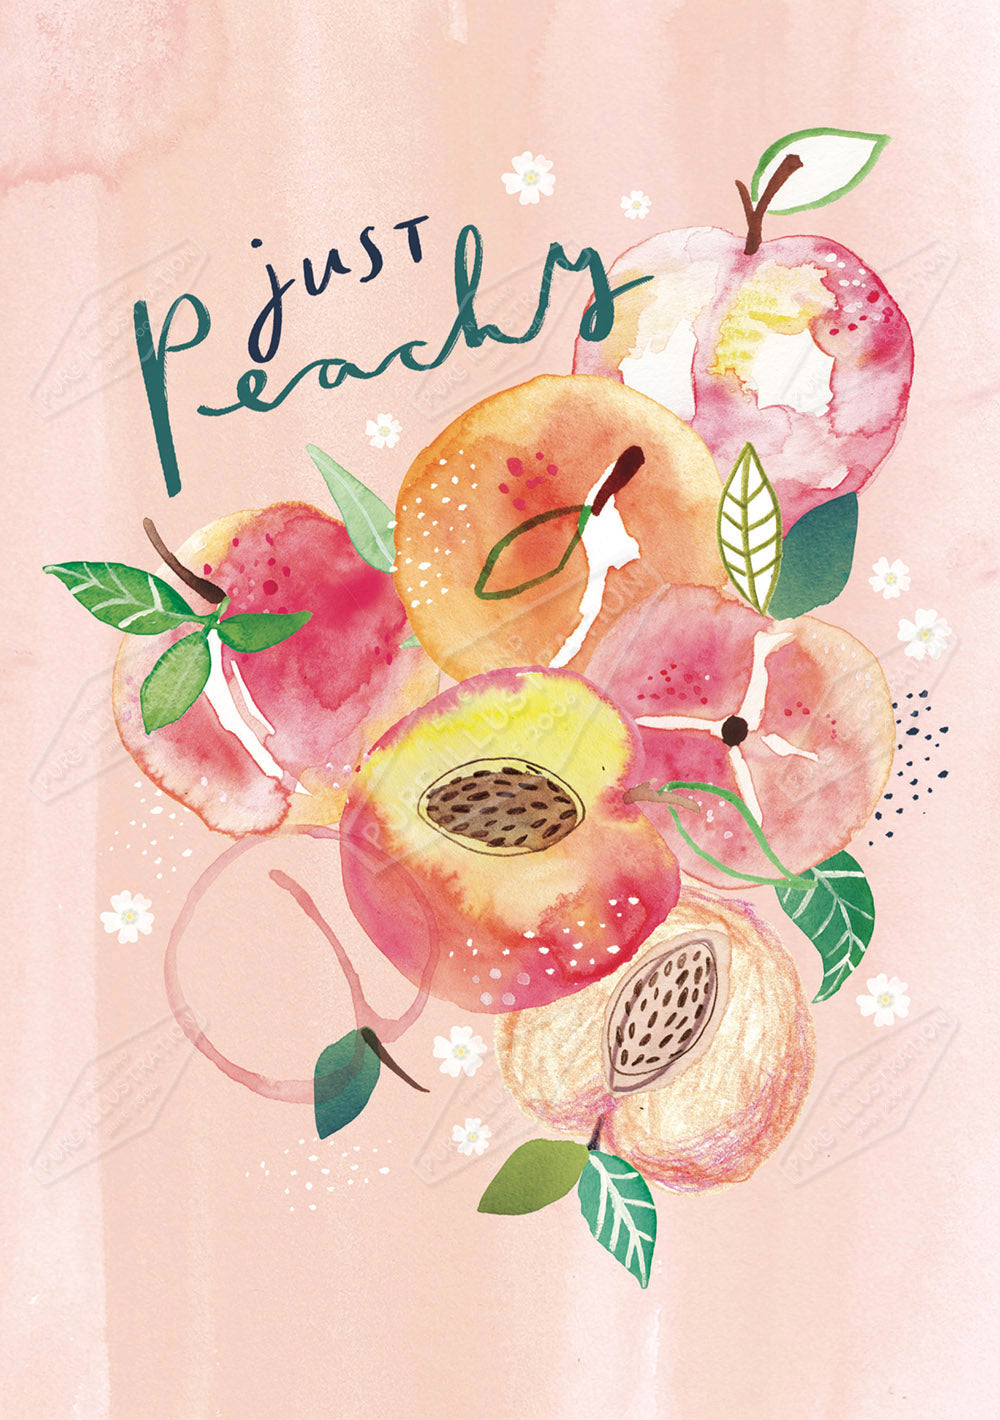 00034376EST- Emily Stalley is represented by Pure Art Licensing Agency - Everyday Greeting Card Design